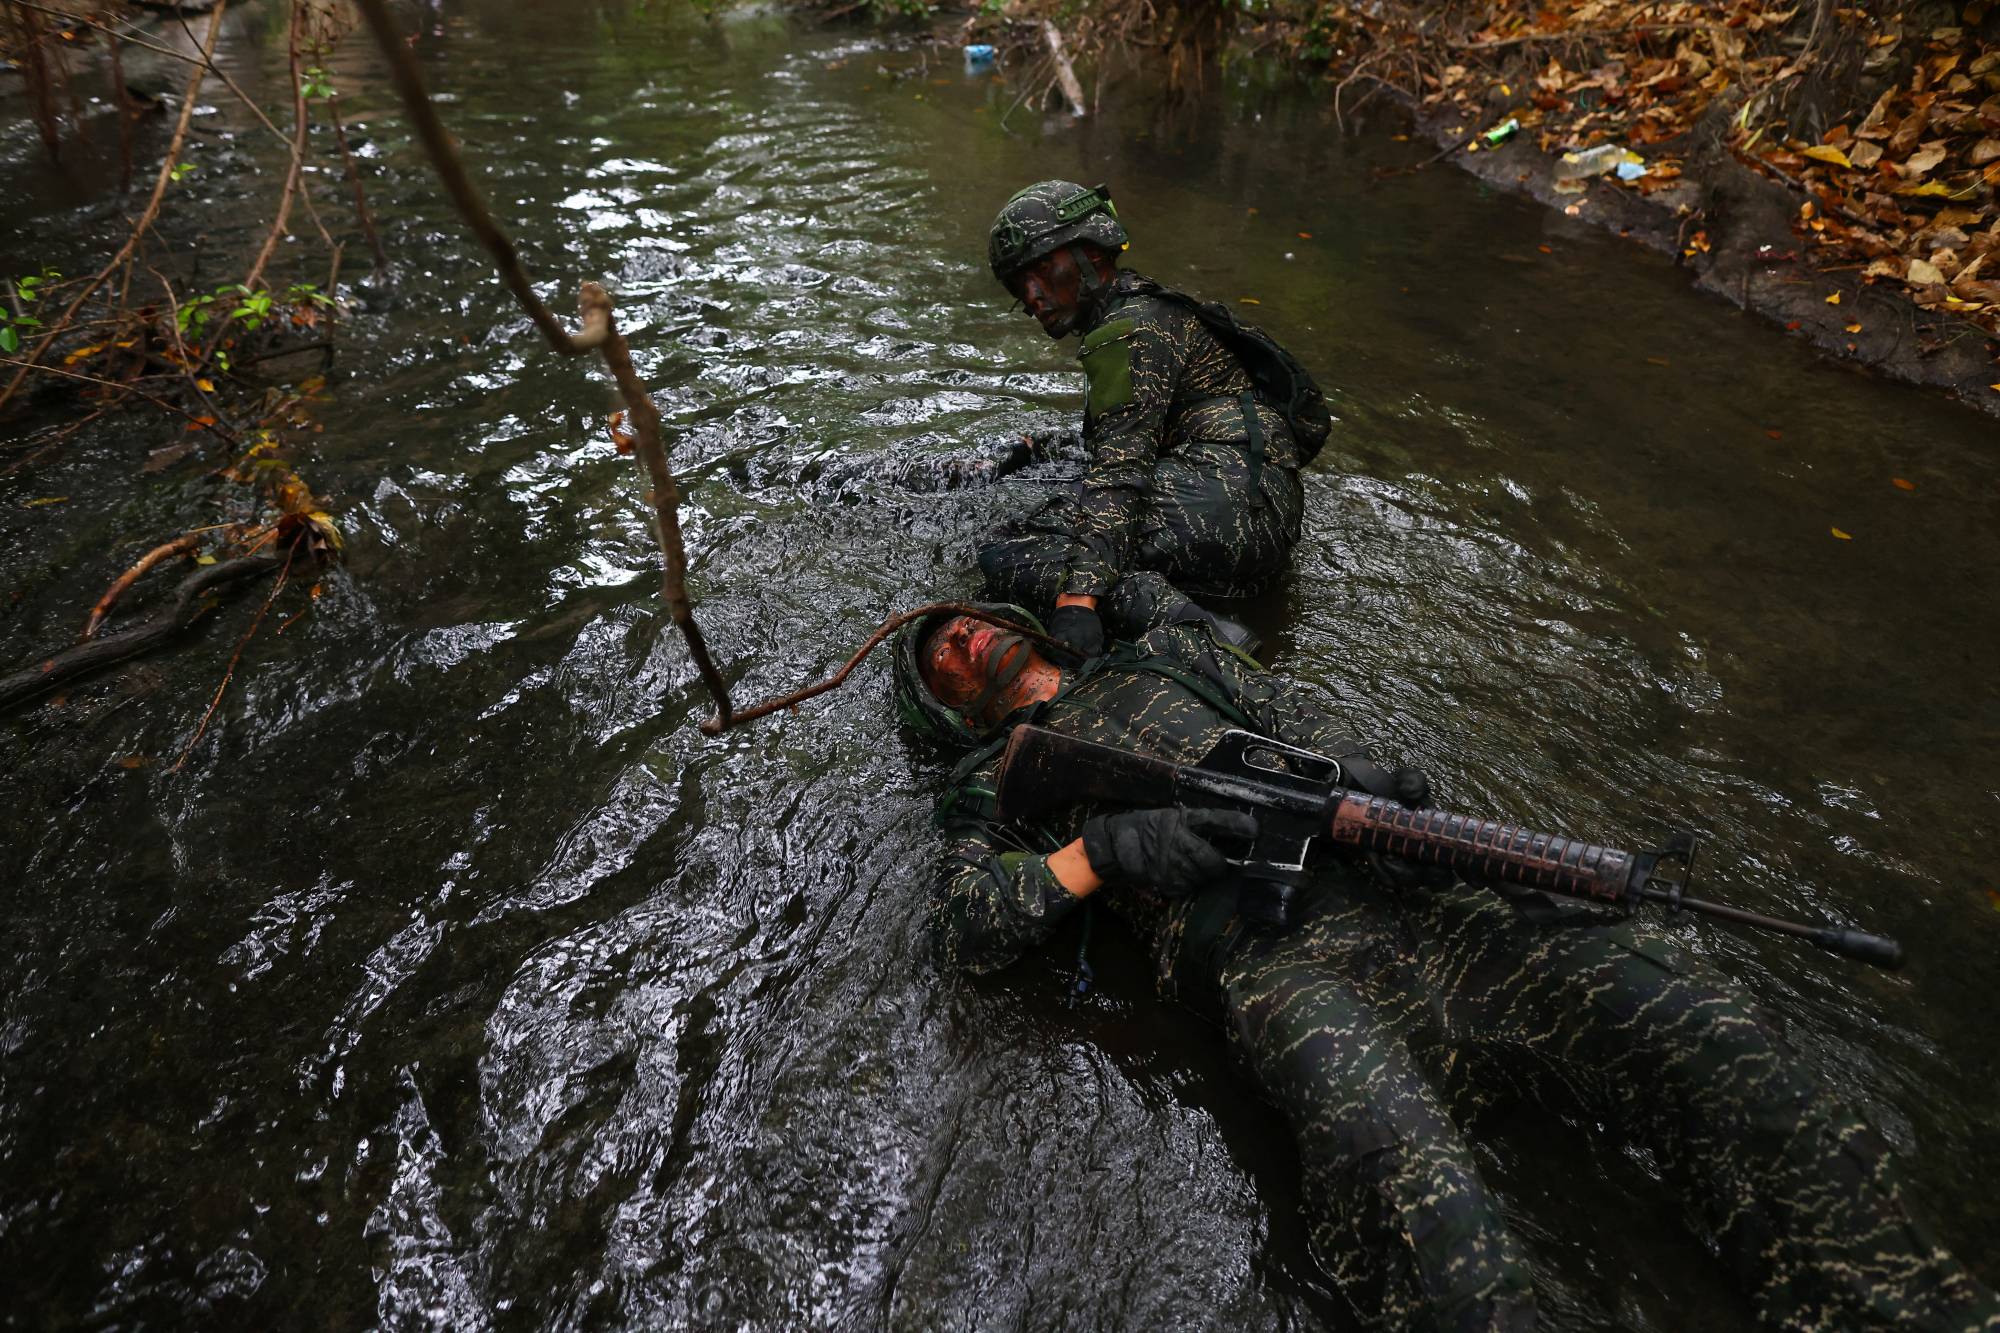 An ARP trainee pulls a fellow trainee, who is pretending to be injured, through sewage contaminated water during the last week of a ten week program to become members of the Taiwan navy's elite Amphibious Reconnaissance and Patrol unit, at Zuoying navy base in Kaohsiung on Dec. 21.  | REUTERS